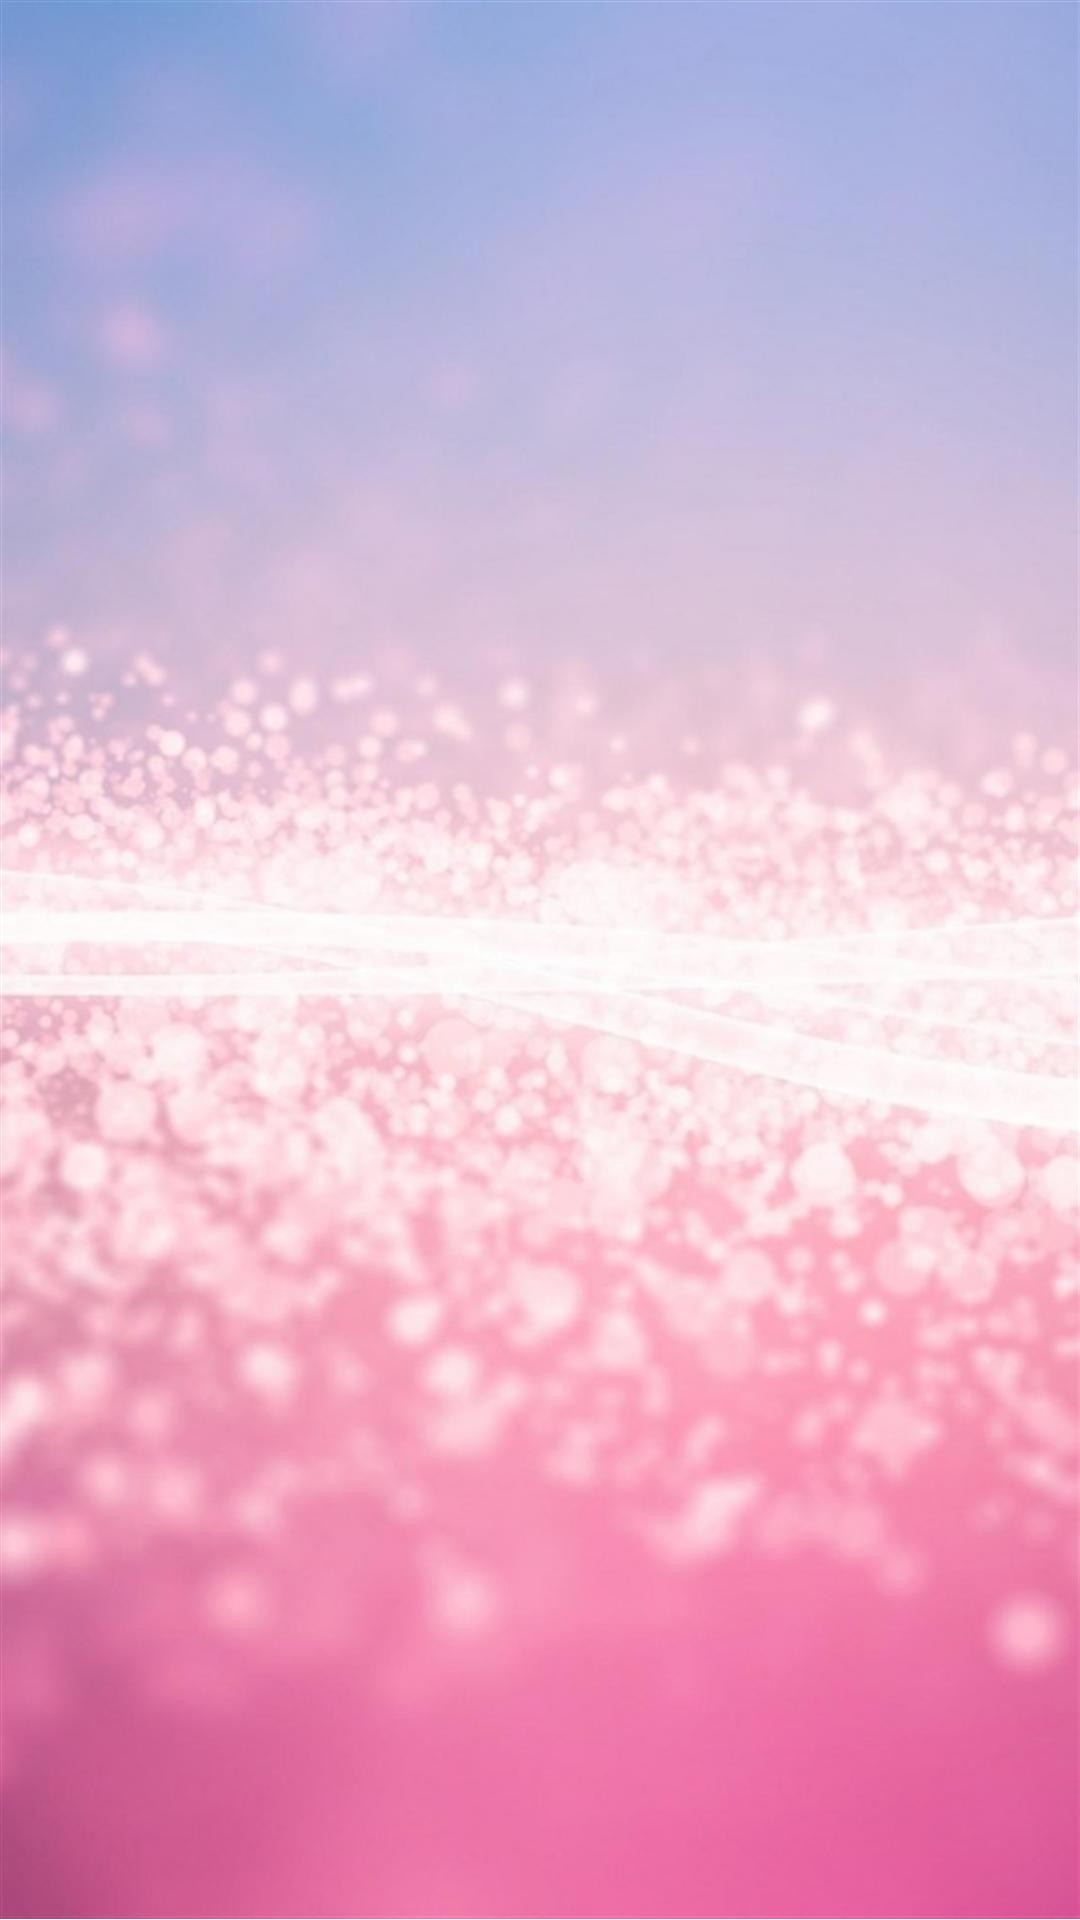 Pics Photos Pink Glitter iPhone Wallpaper Graphic